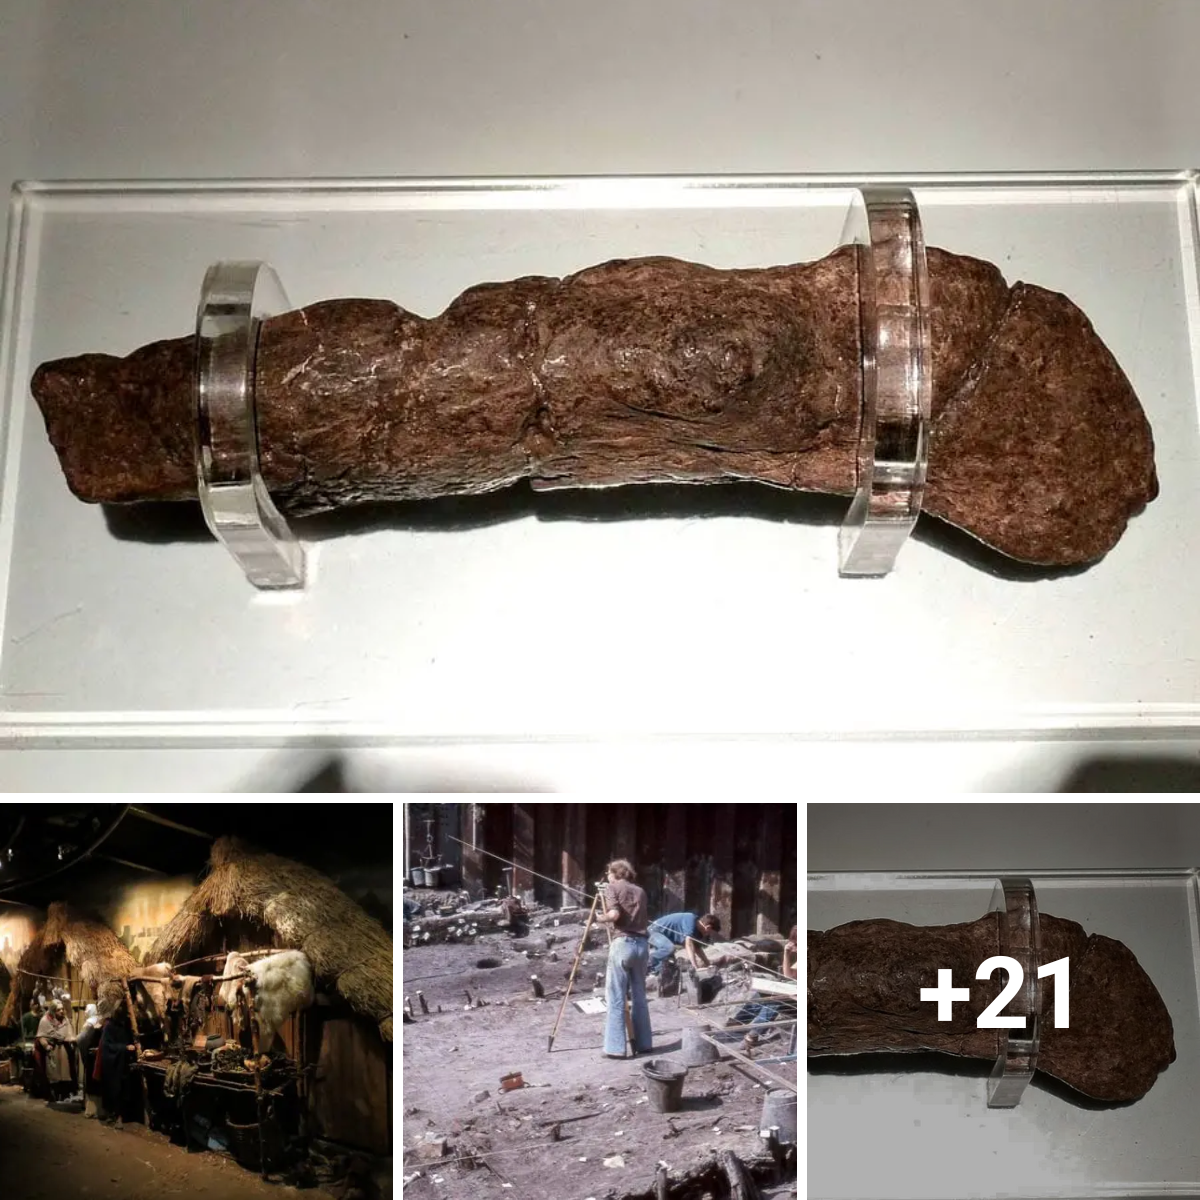 This fossilized human excrement, which is the largest ever discovered, is valued at $39,000.